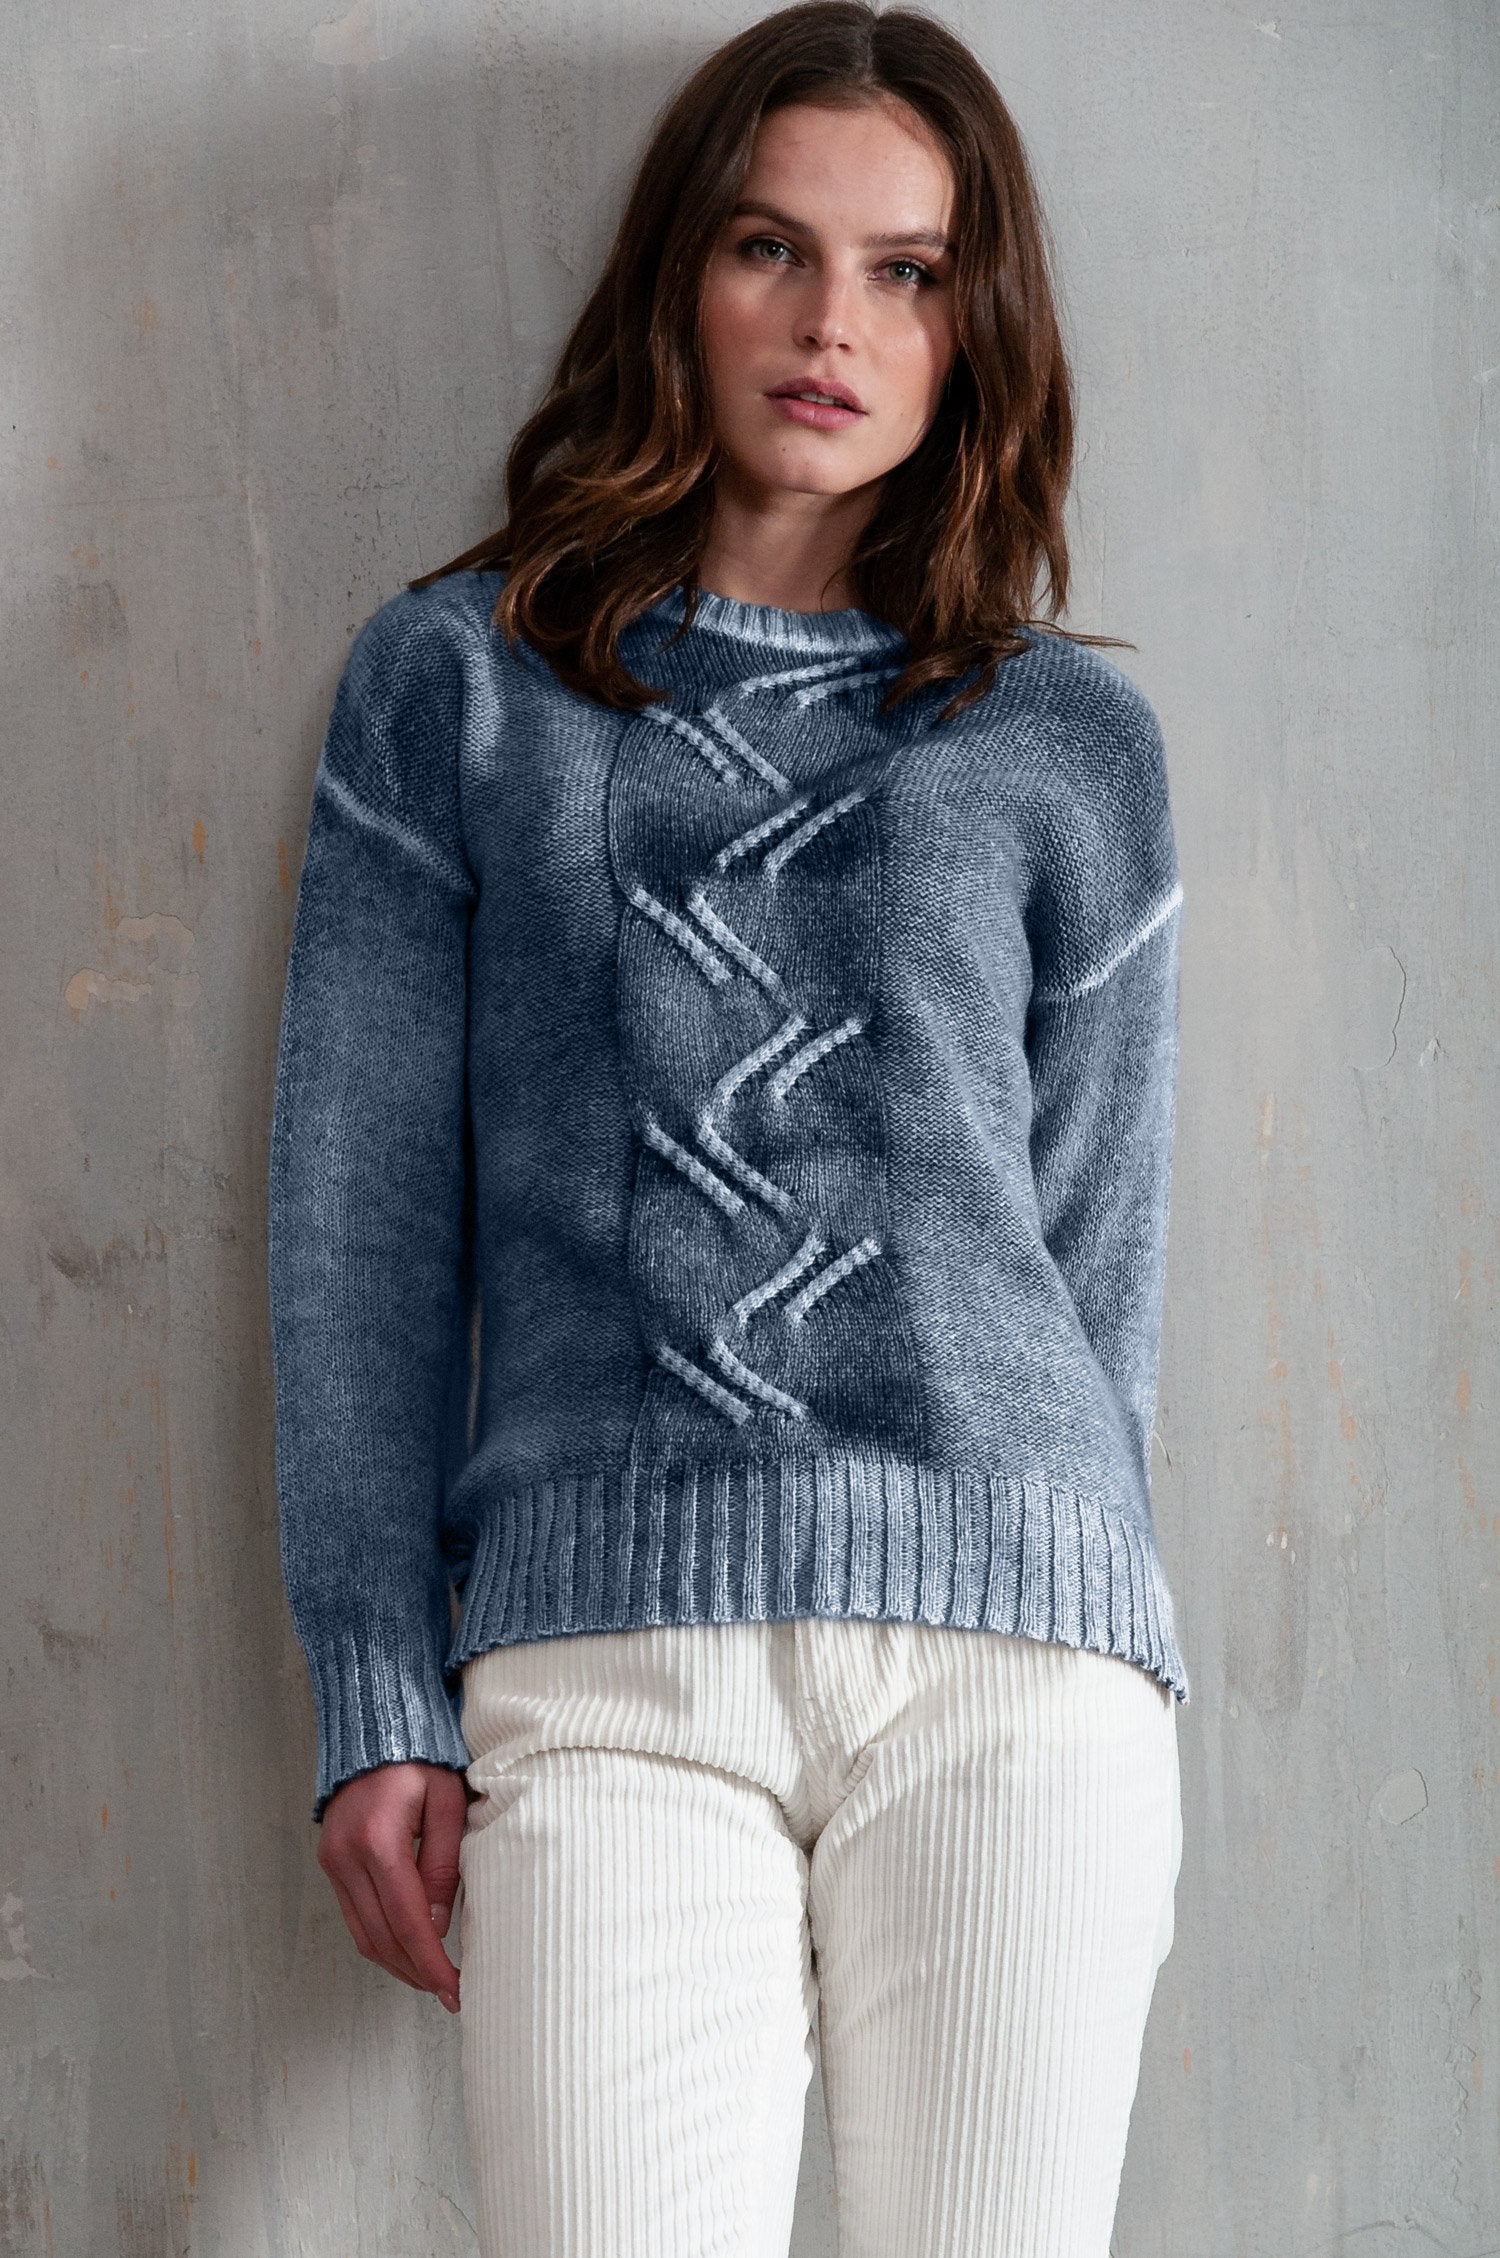 Copse Navy Spray Painted - Comfy Cable Sweater - Sweaters